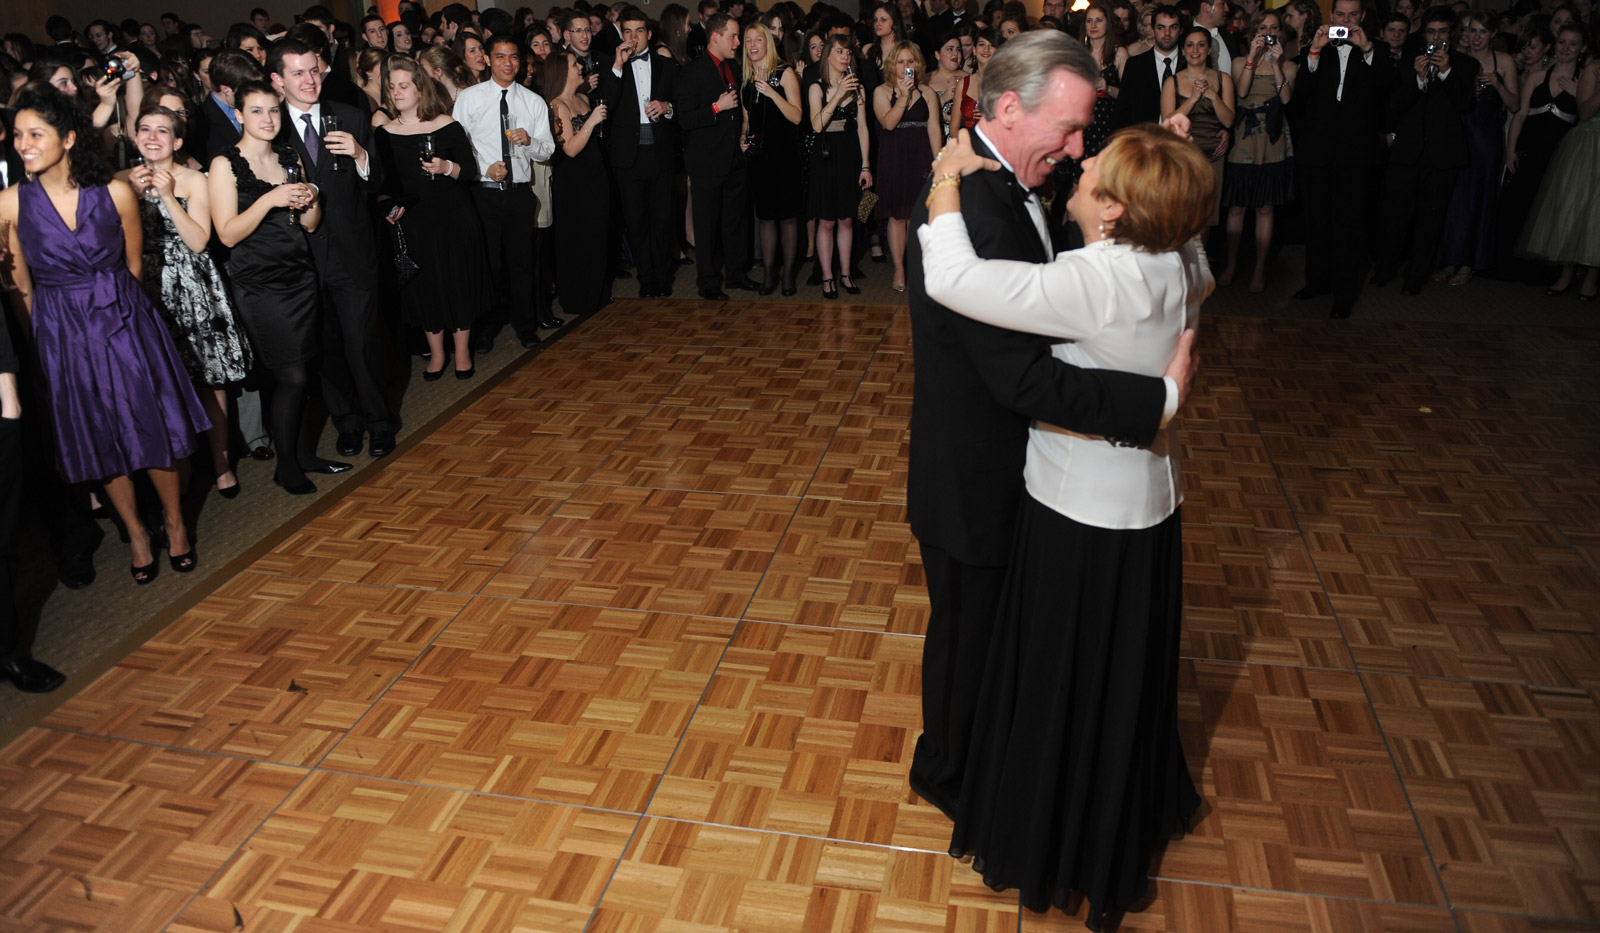 John and Jeanne Garvey dance as students look on